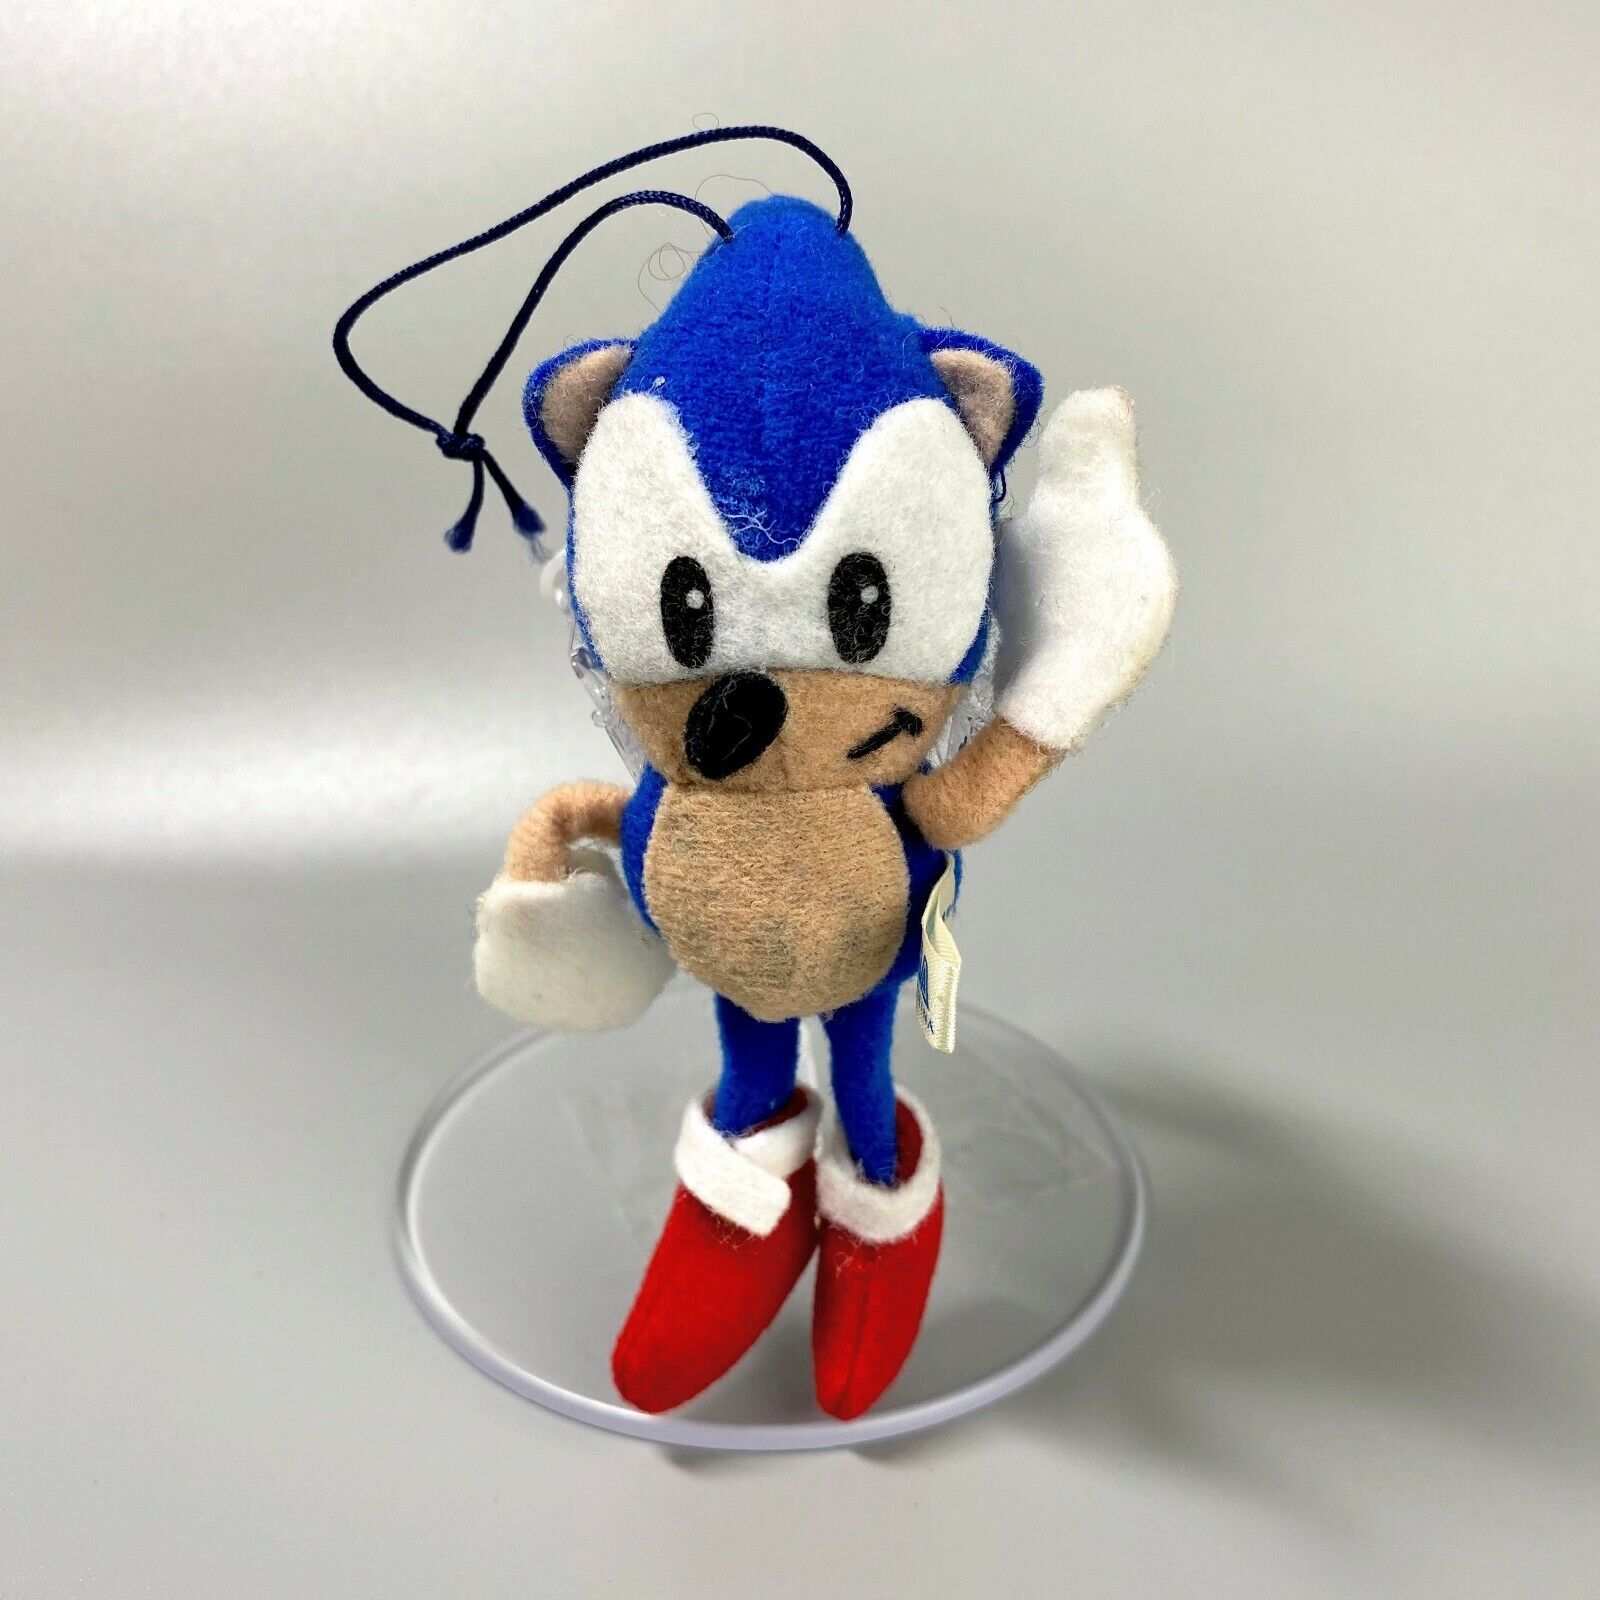 Very Rare Early model Sonic the hedgehog Keychain mascot Plush doll from japan